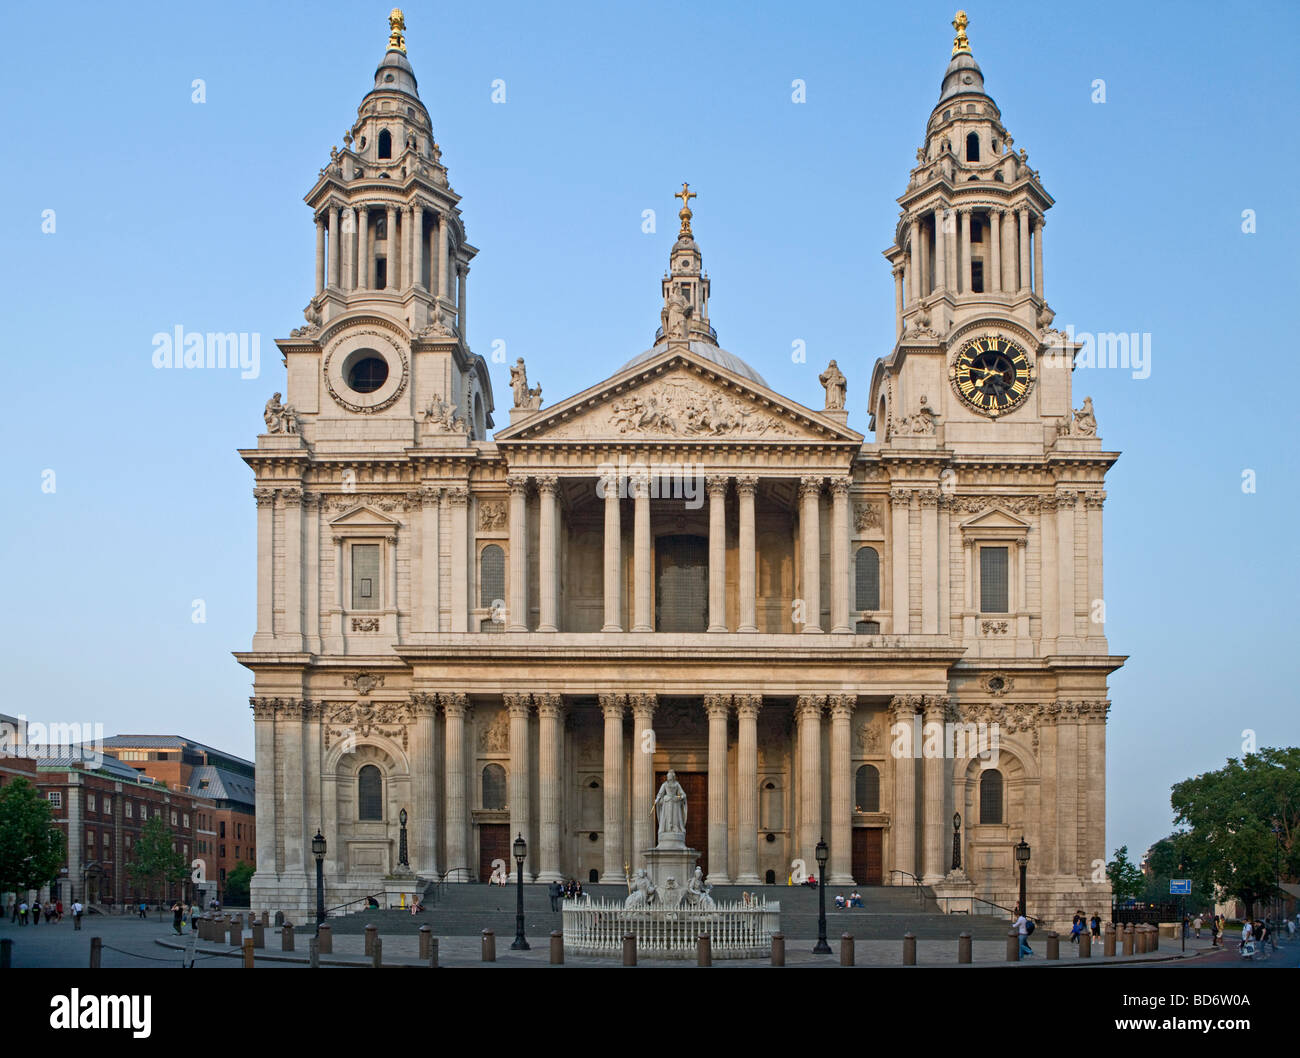 St Pauls Cathedral Ludgate Hill London England Stock Photo